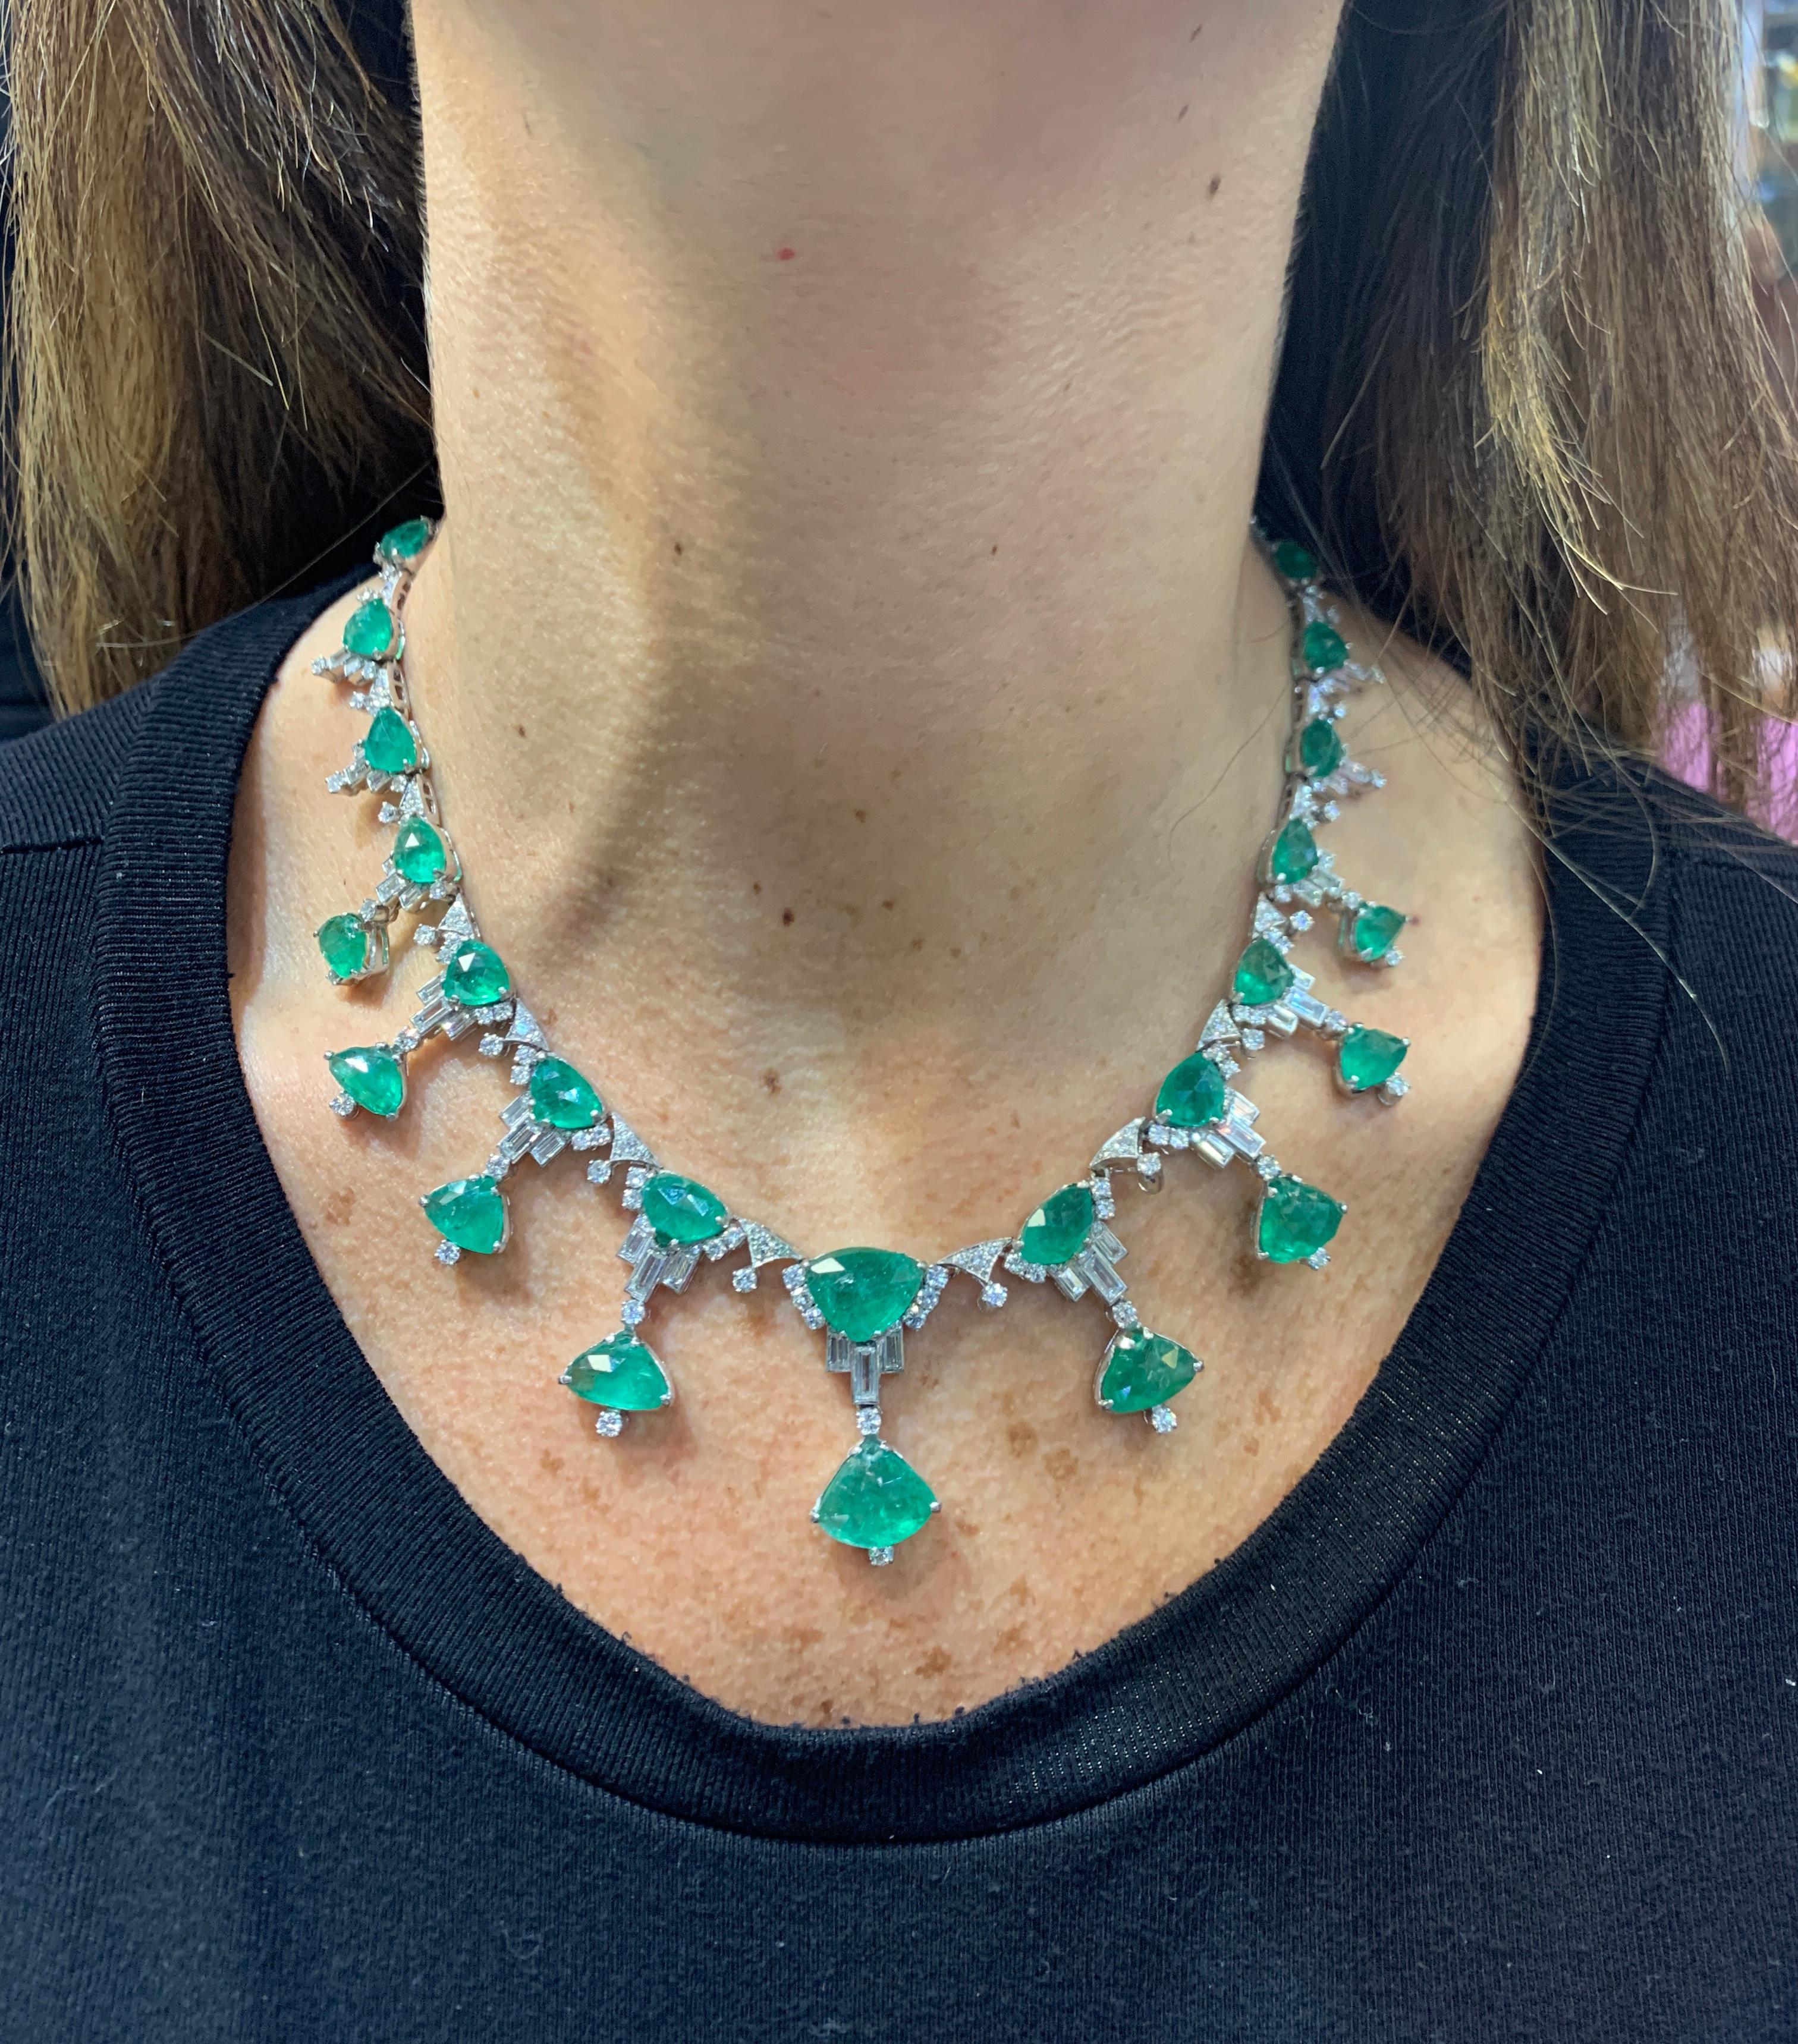 Carved Taveez Emerald and Diamond Necklace
34 Emeralds approximately 58.35 carats
42 Baguette Cut Diamonds and 224 Round Cut Diamonds approximately 6.02 carats
Measurements: 16